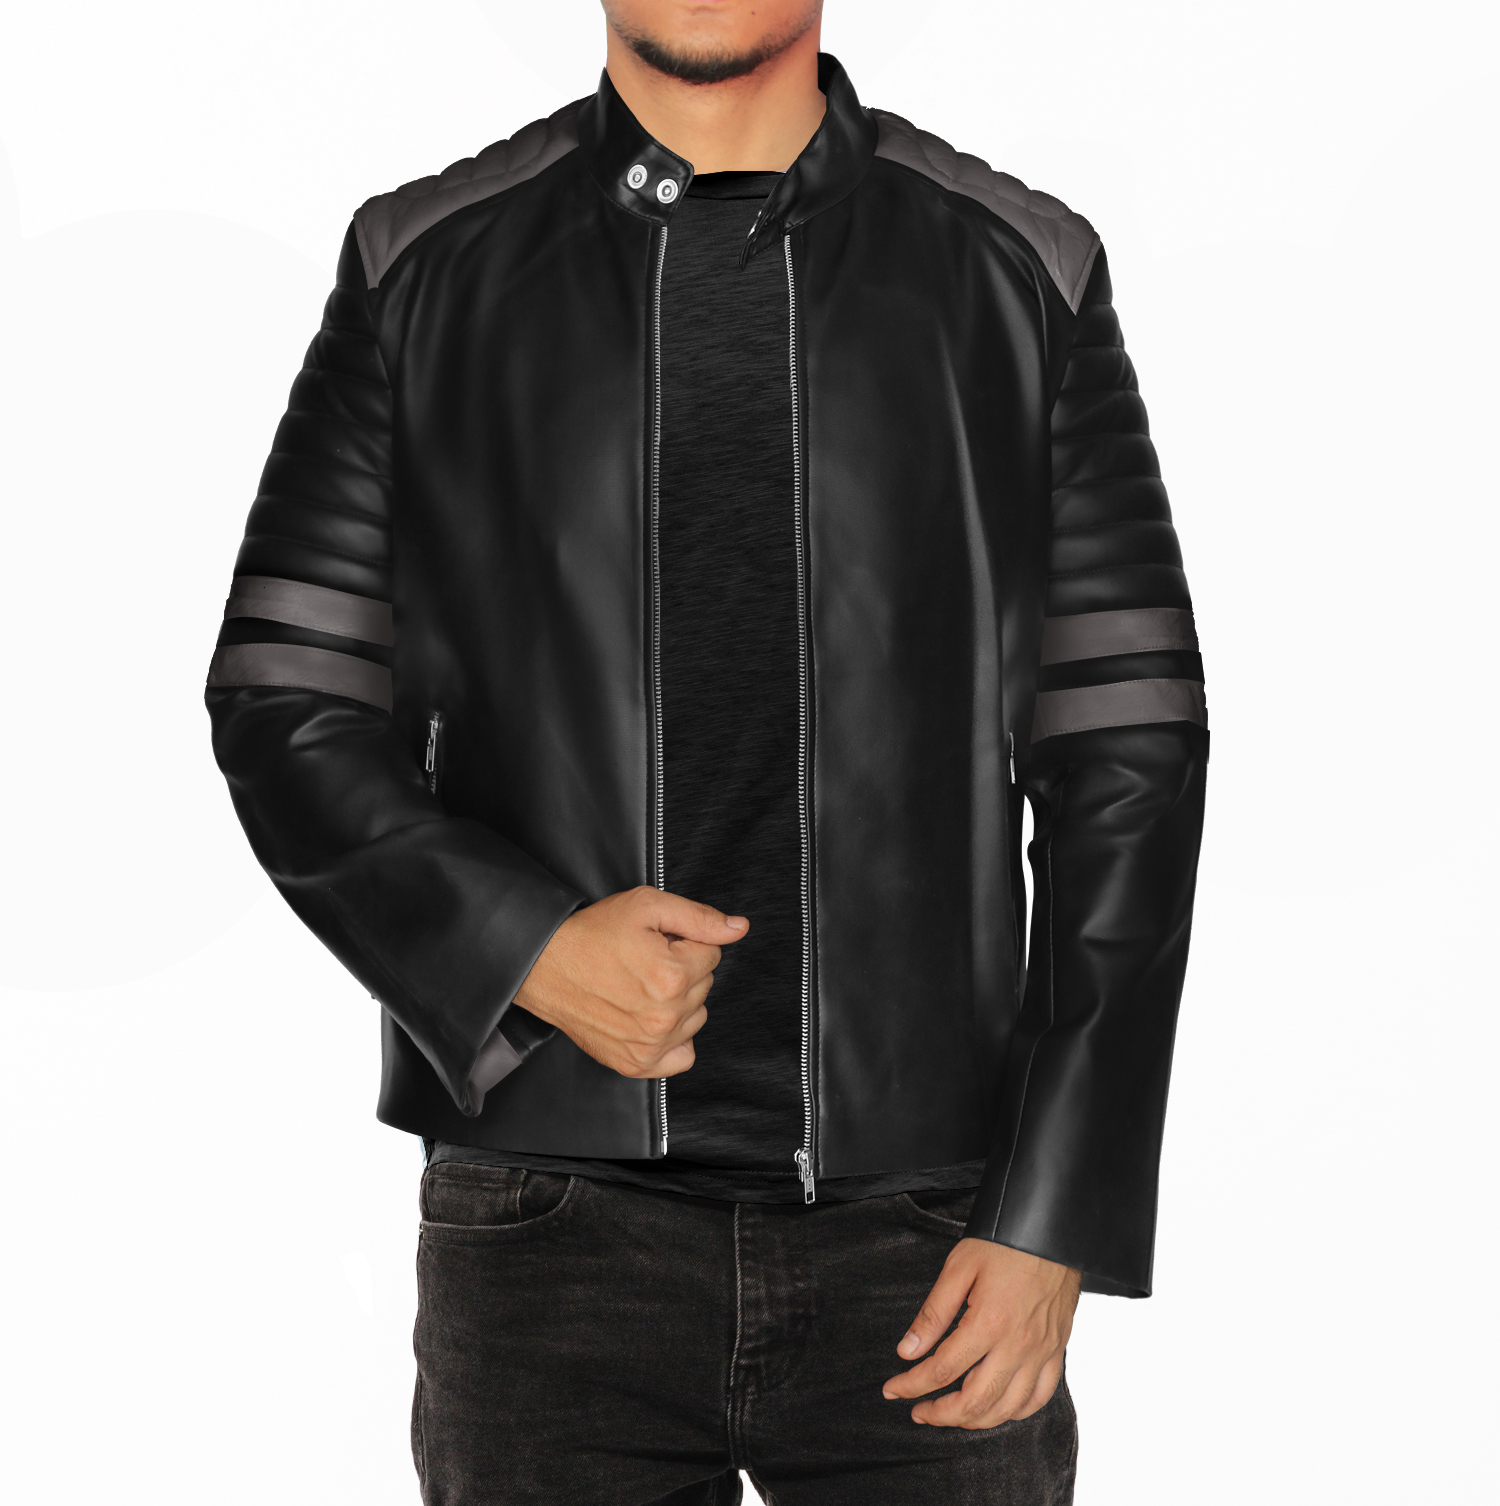 NomiLeather black leather jacket | mens leather jacket and genuine leather jacket men (Black With Grey Strip ) X-Small - image 2 of 7